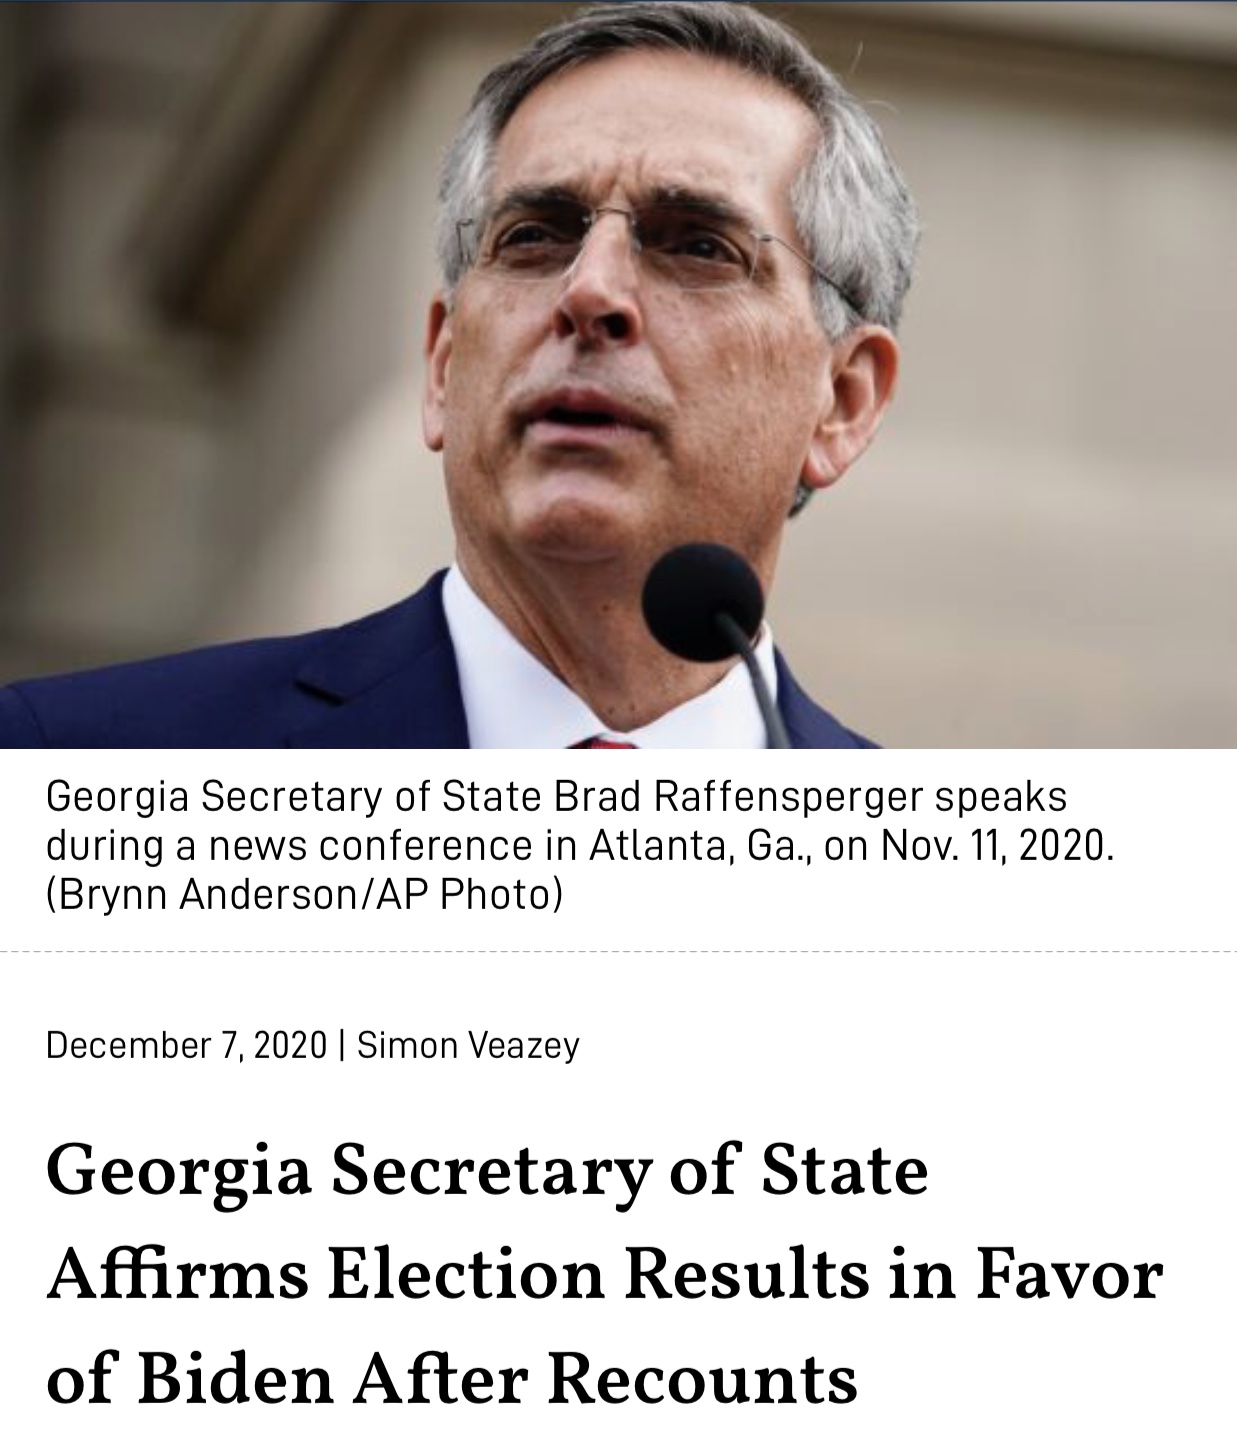 Georgia Secretary of State Affirms Election Results in Favor of Biden After Recounts